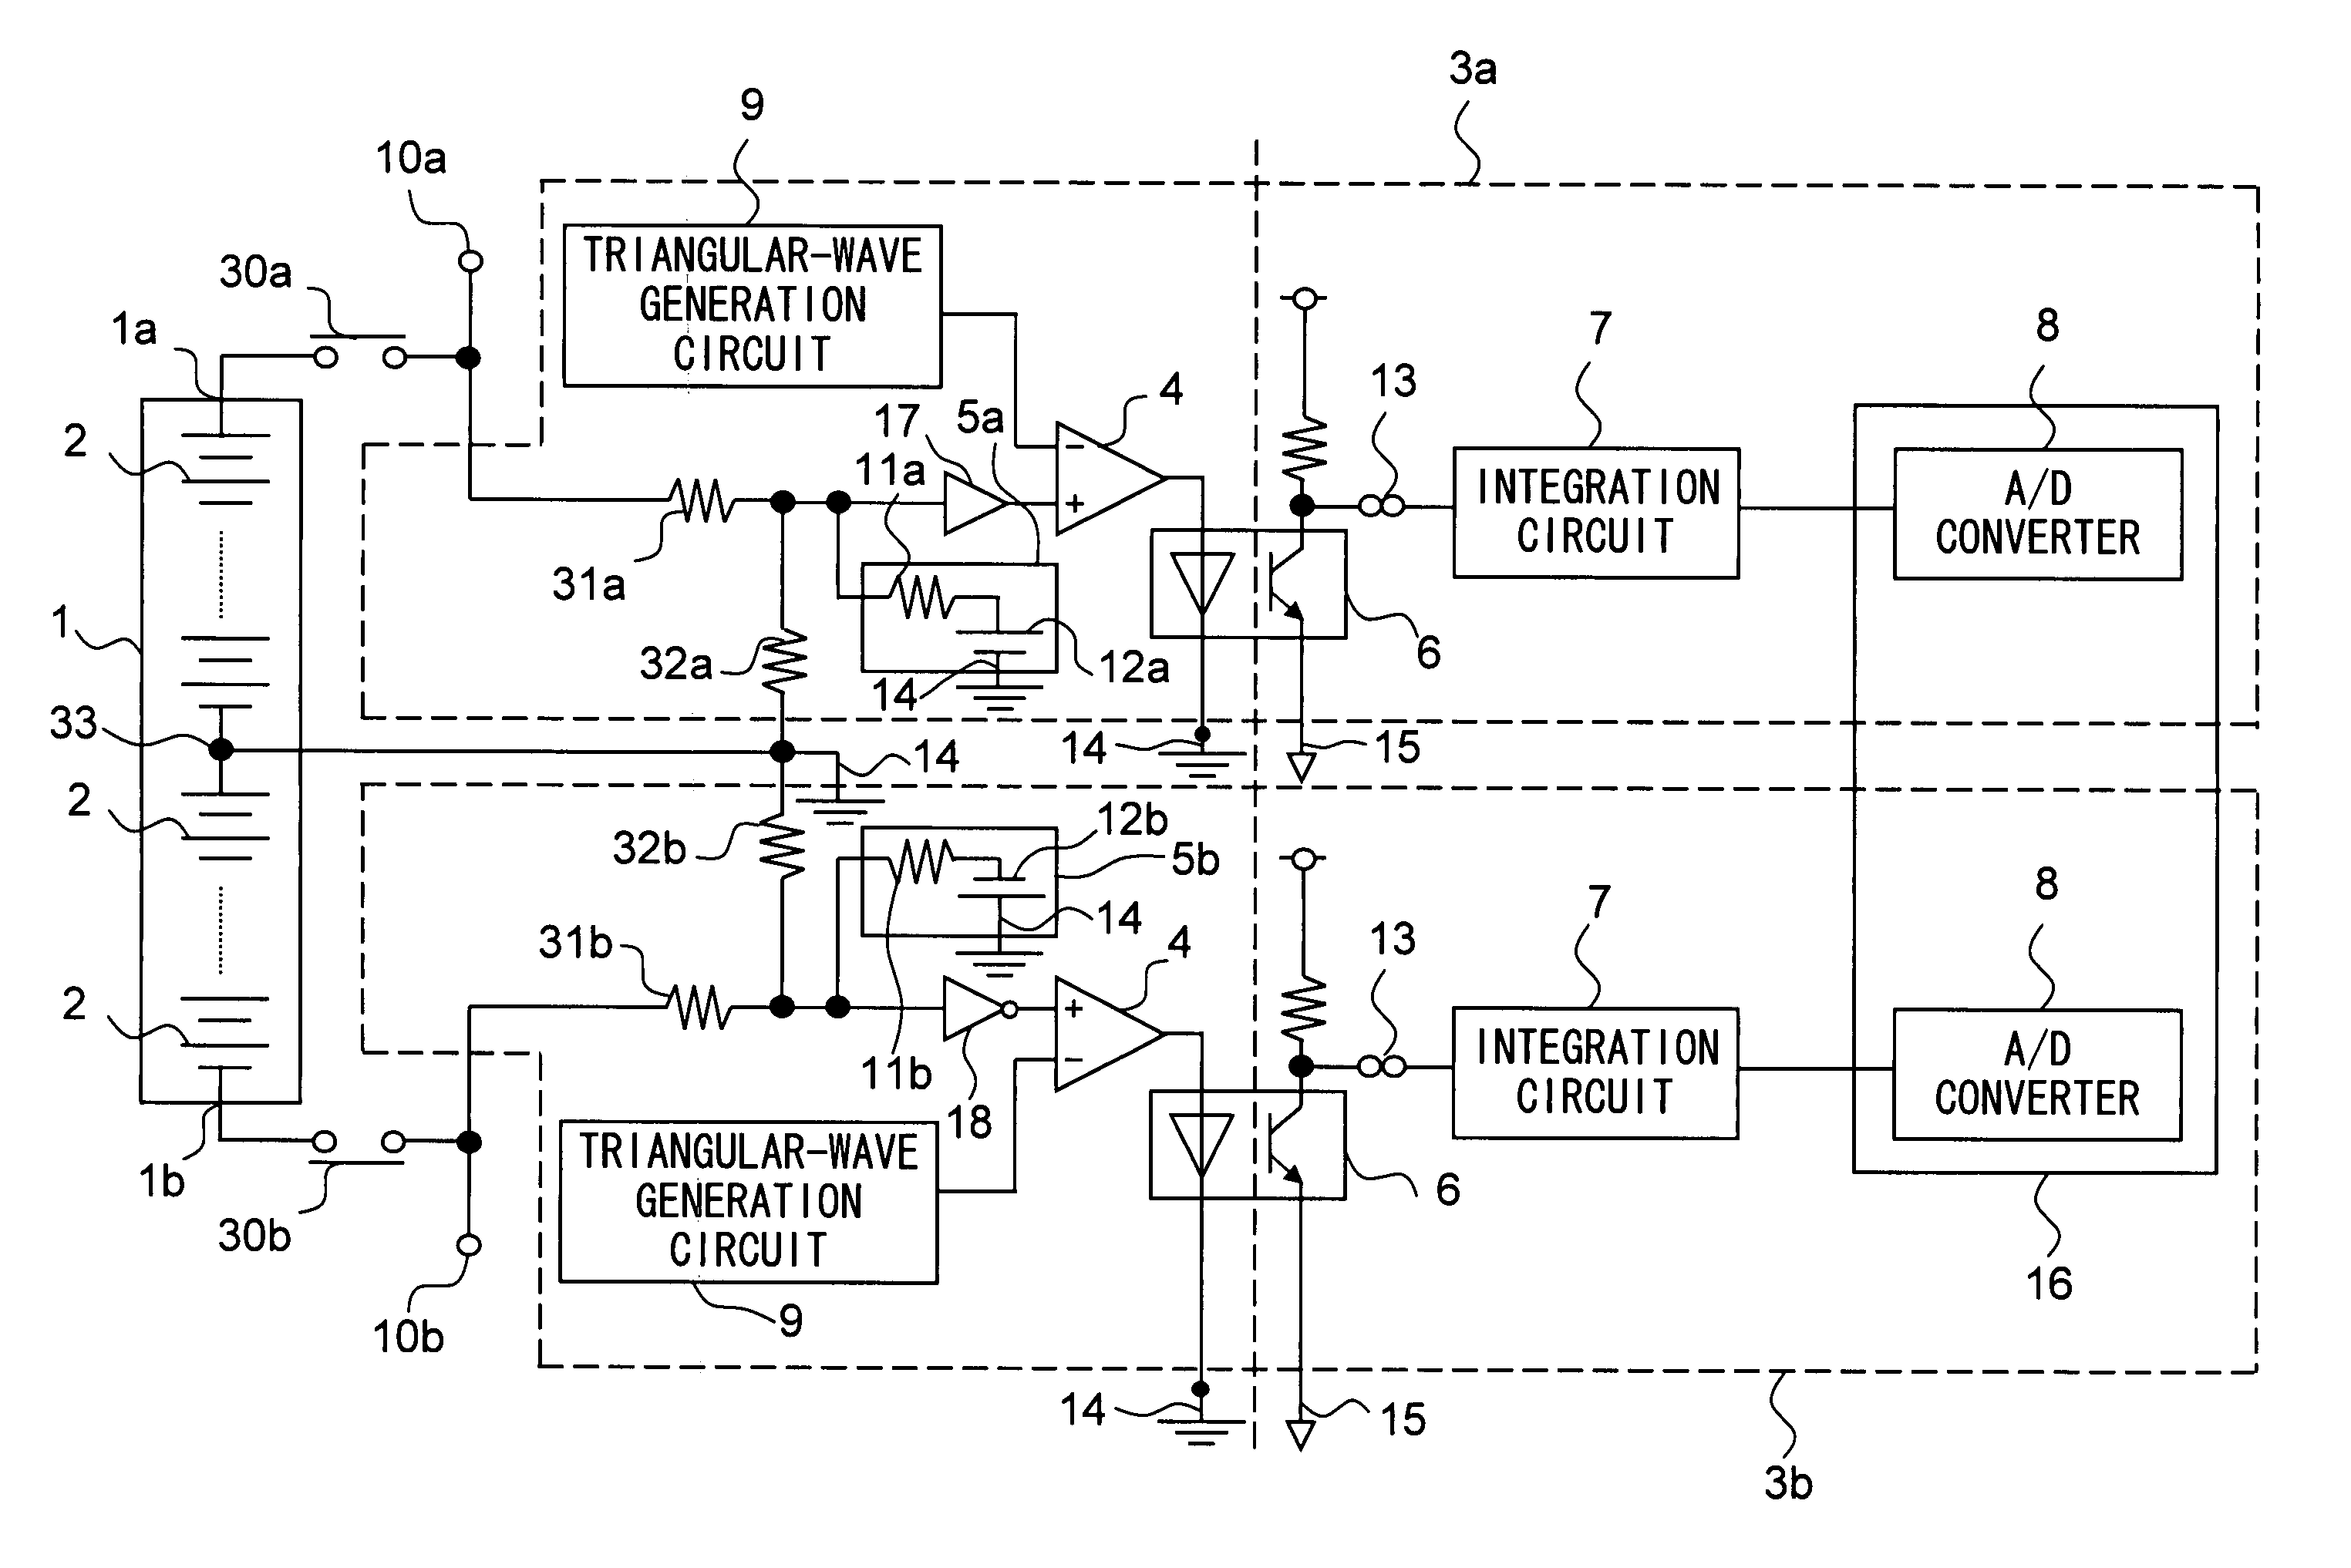 Power supply apparatus for detecting battery voltage and the portions of faults